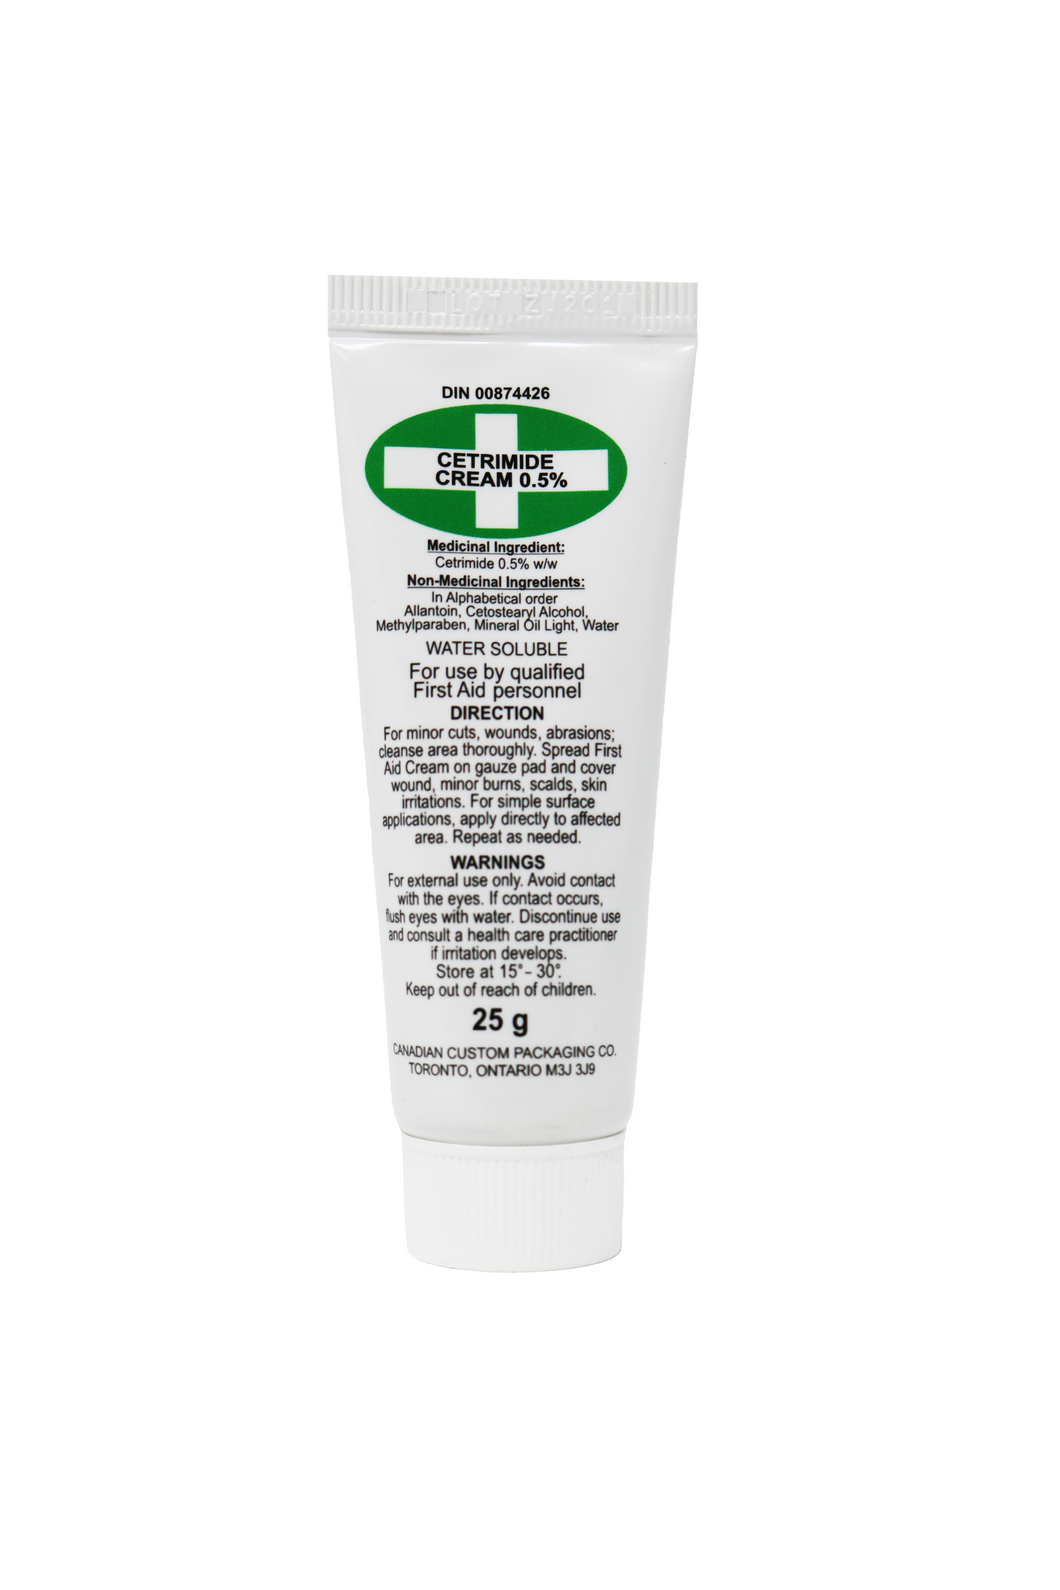 First Aid Cetrimide Cream 0.5% (25g)